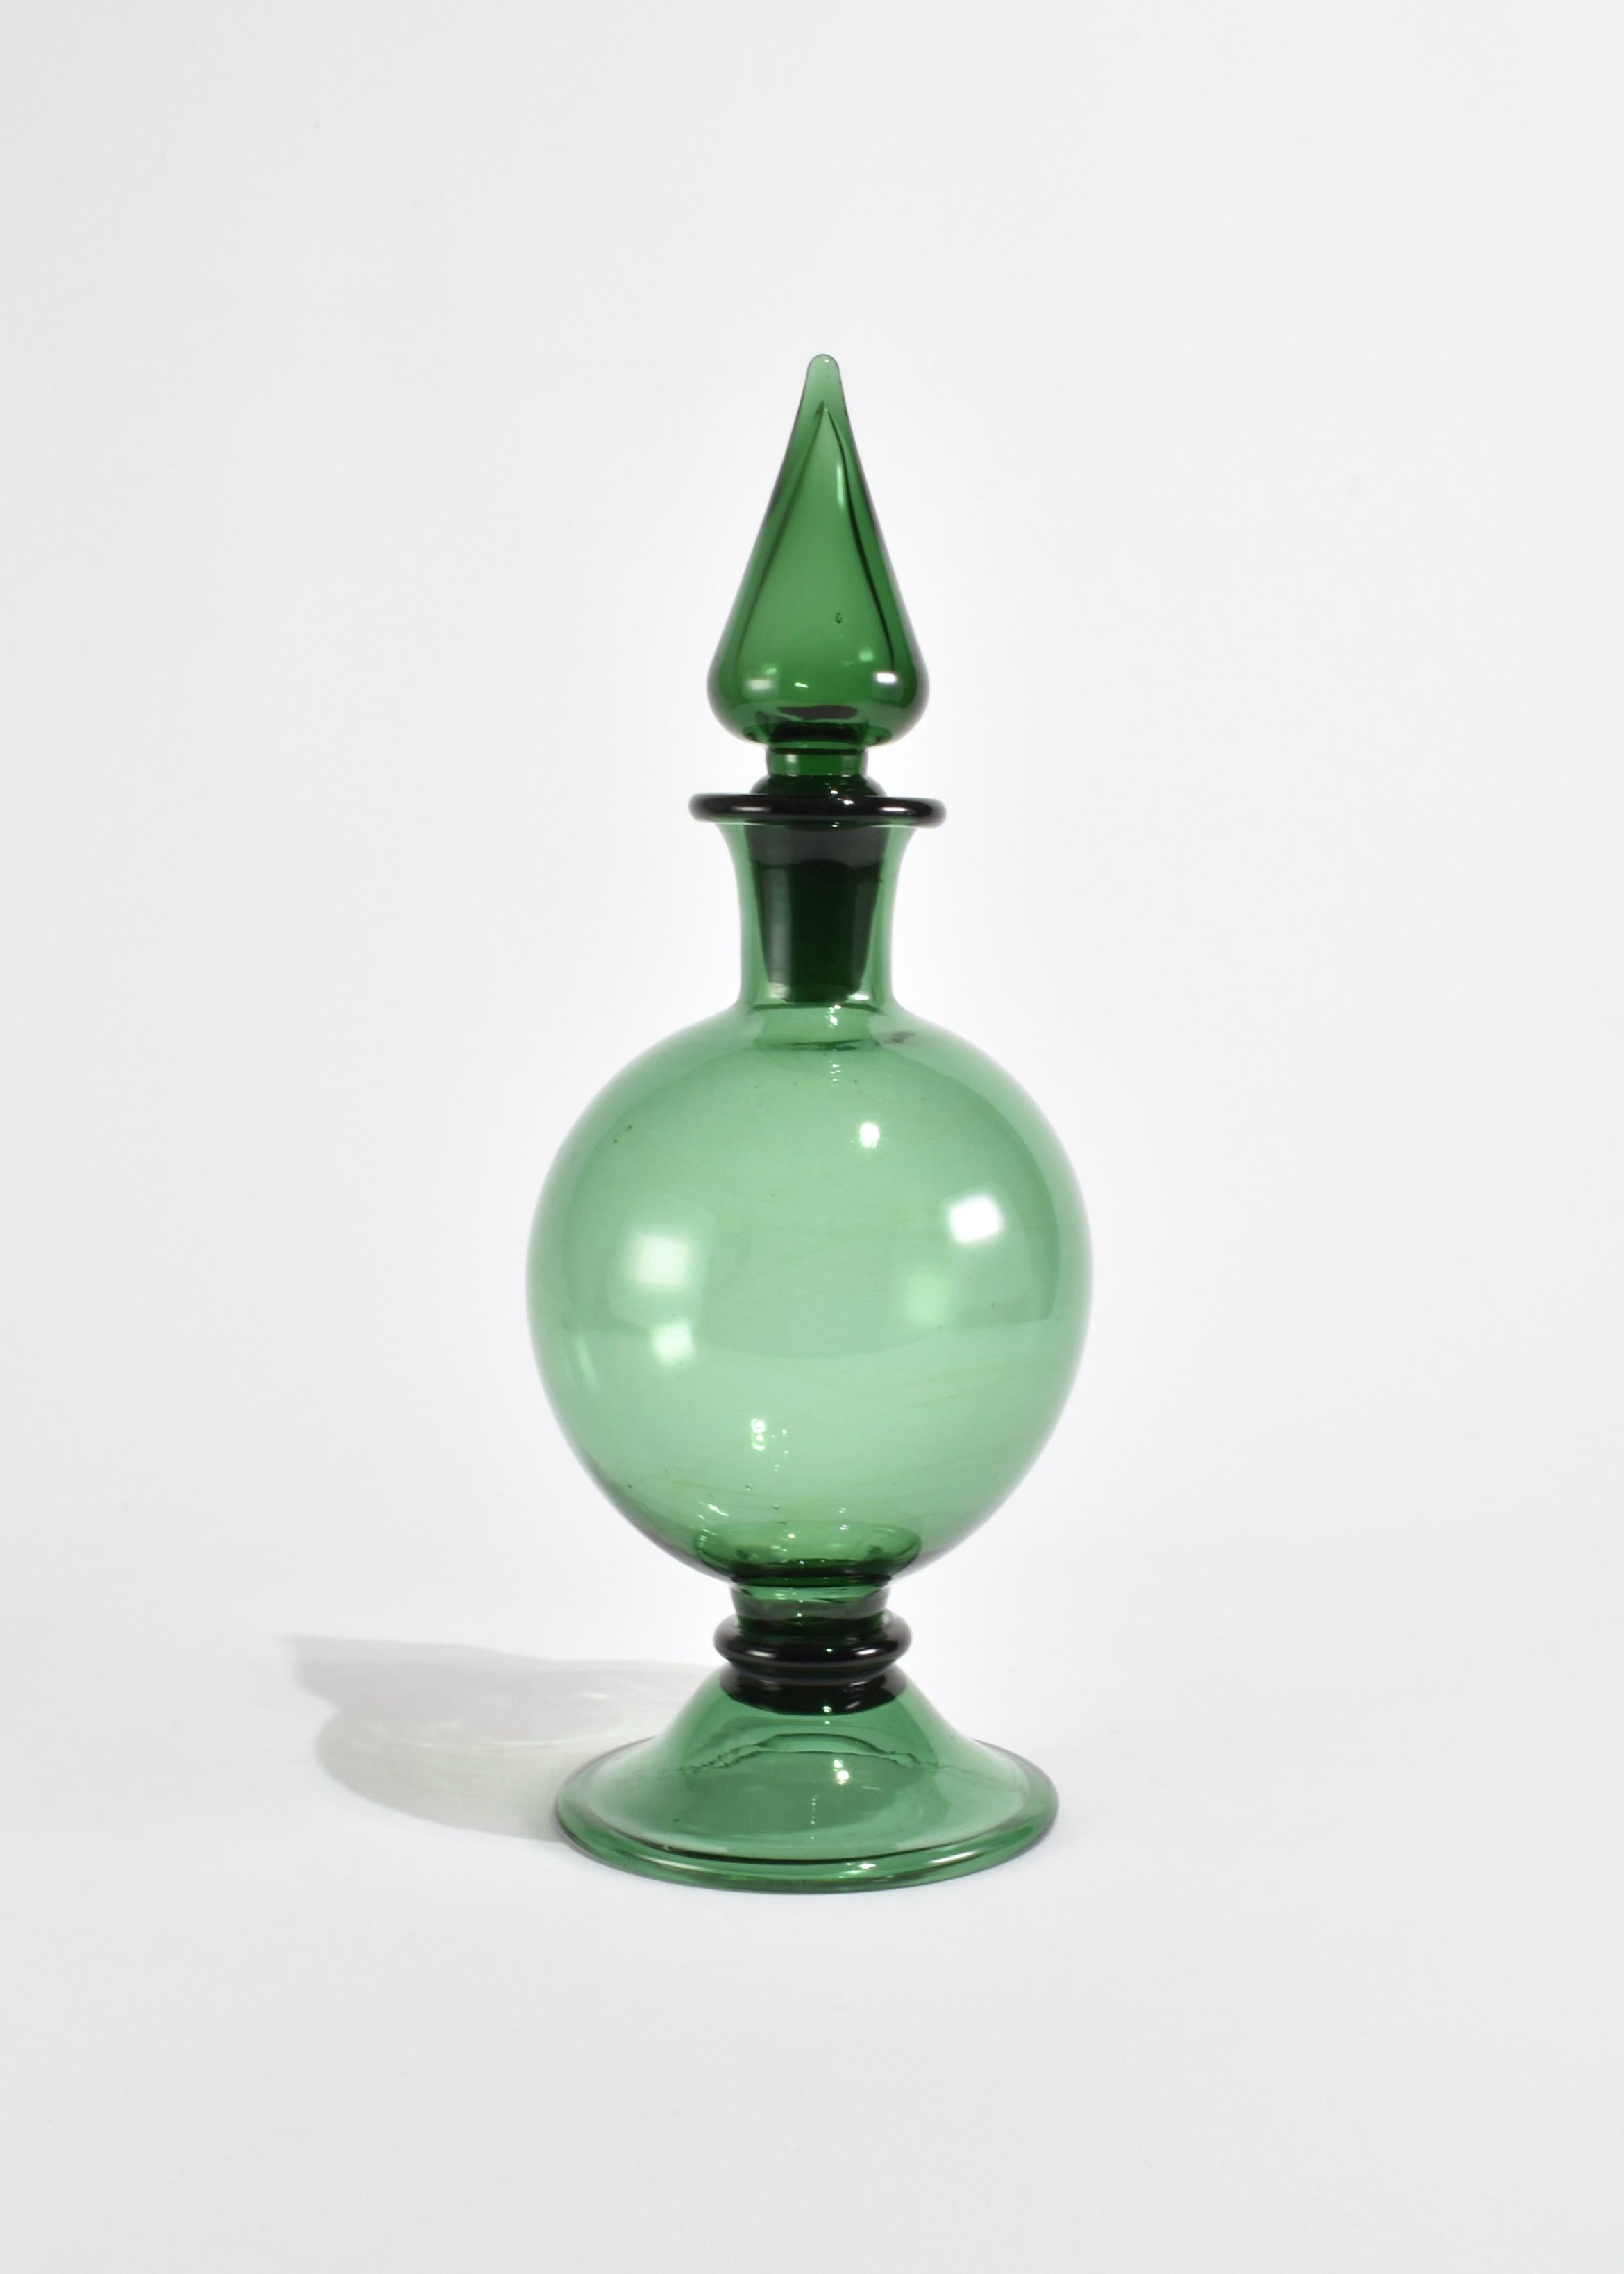 Beautiful hand blown glass decanter in green with a pointed glass stopper. Made in Italy.